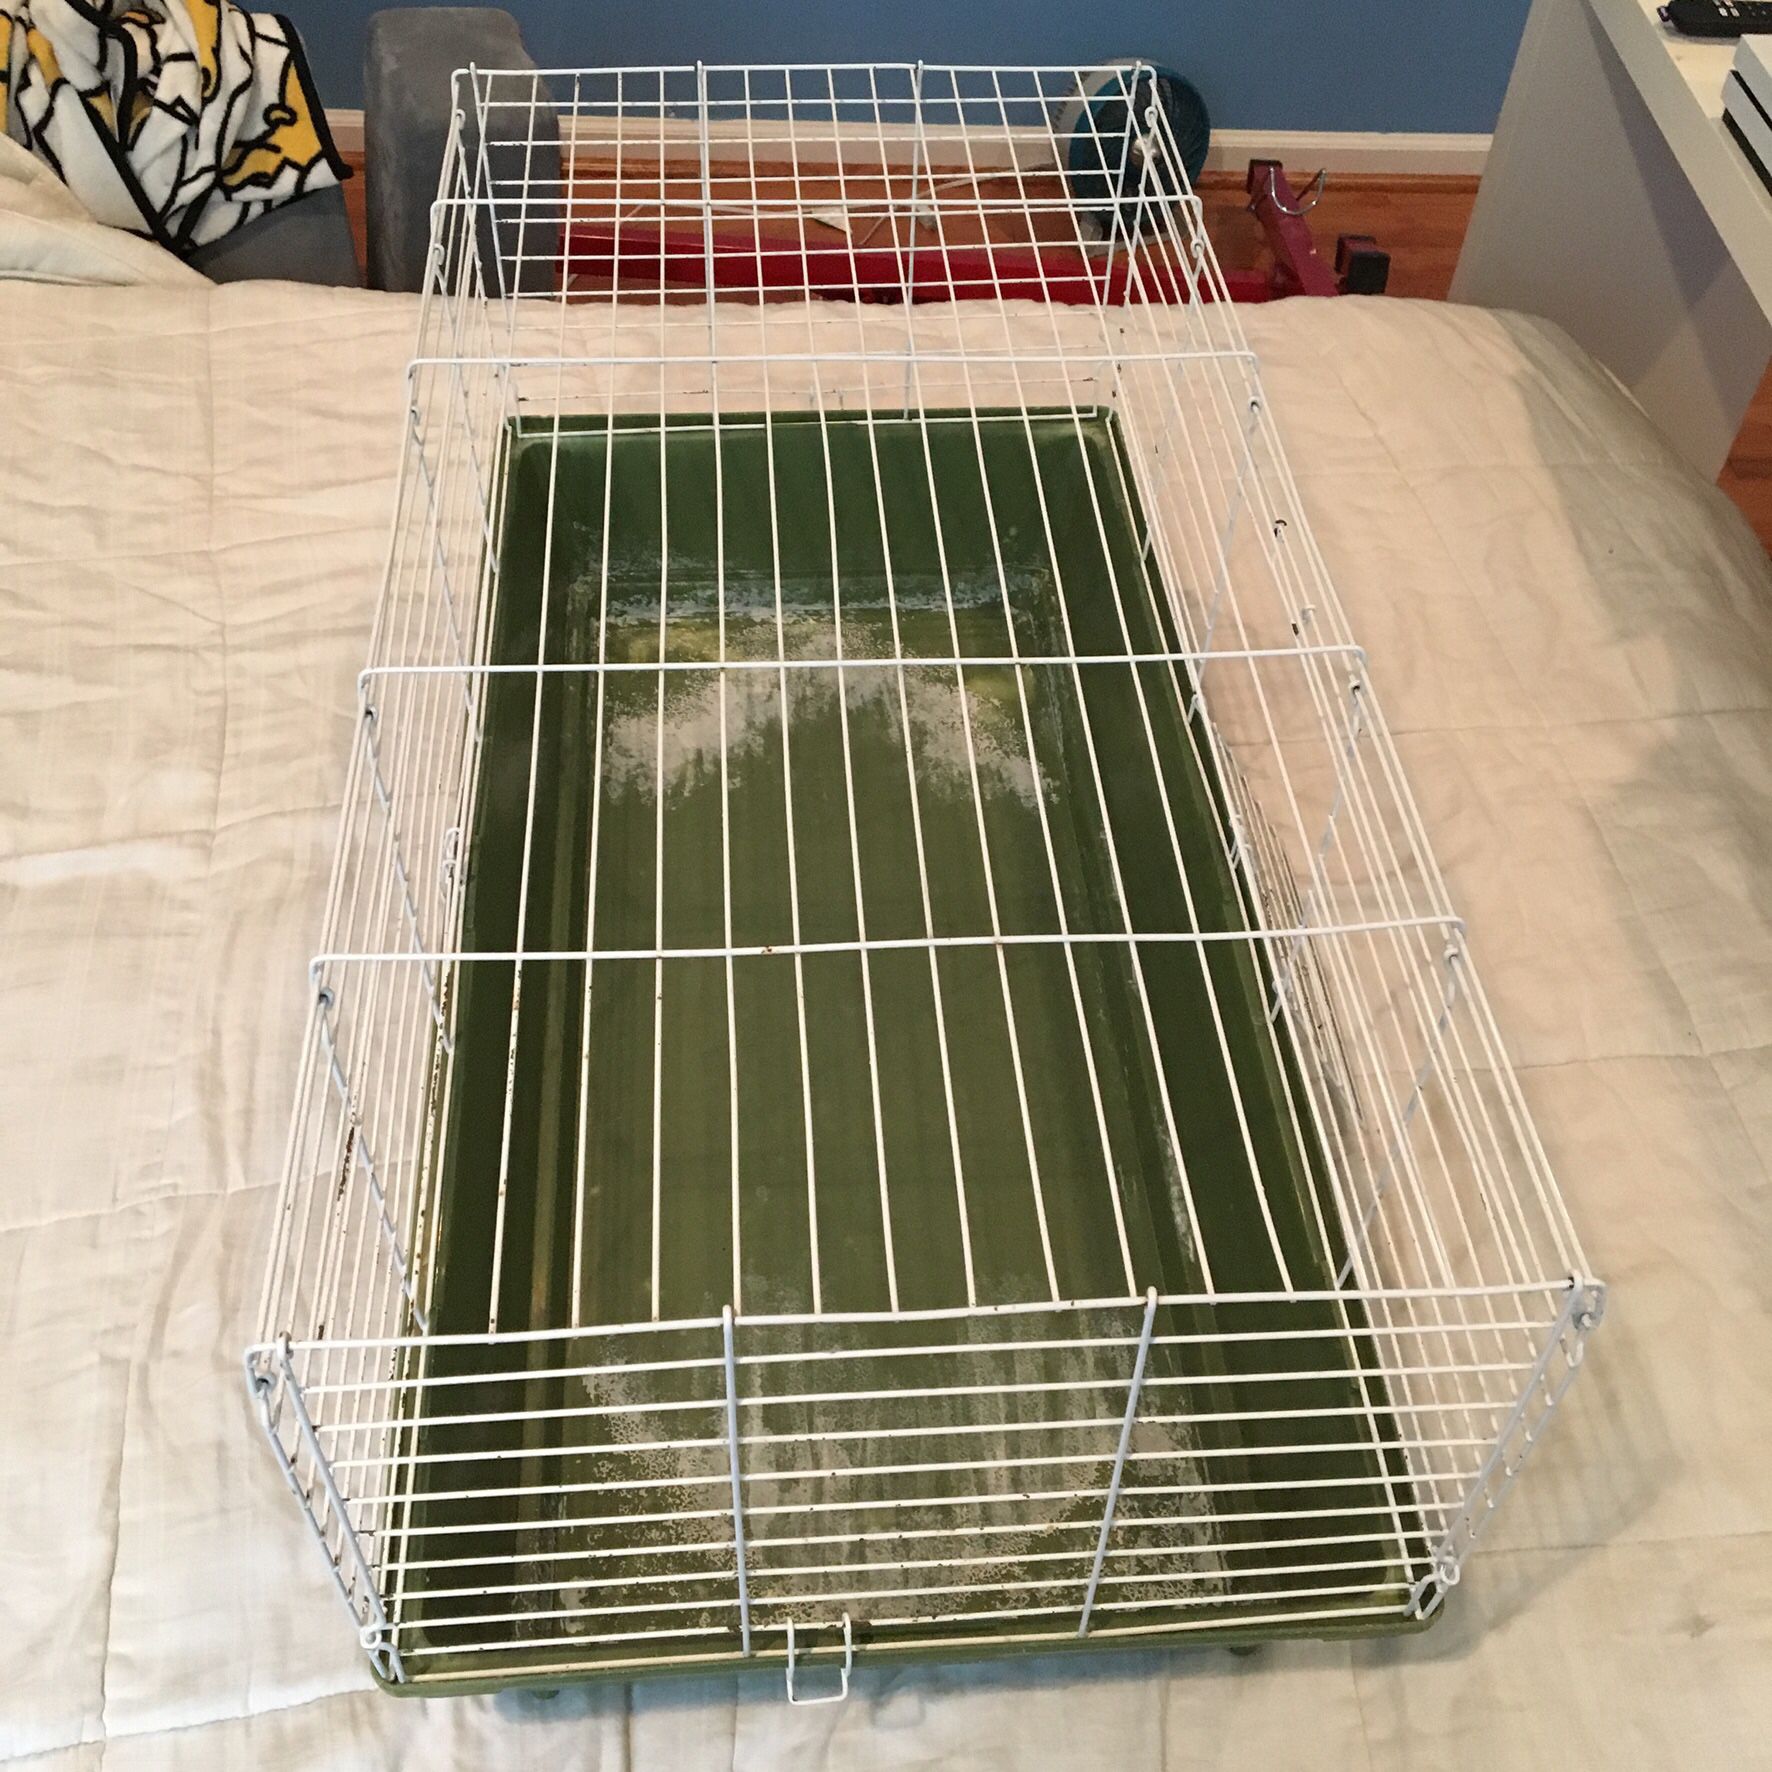 Bunny cage or small pet